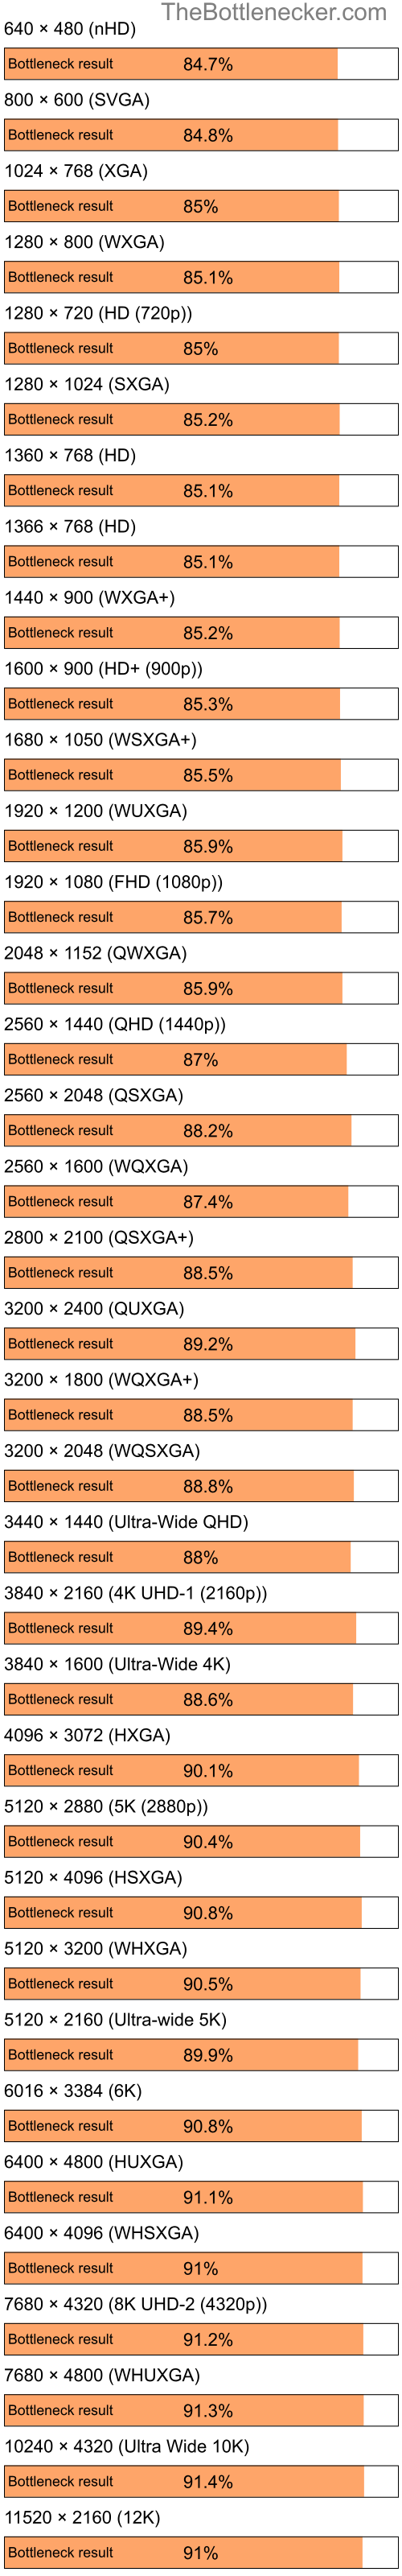 Bottleneck results by resolution for Intel Pentium 4 and NVIDIA GeForce4 Ti 4200 in Processor Intense Tasks